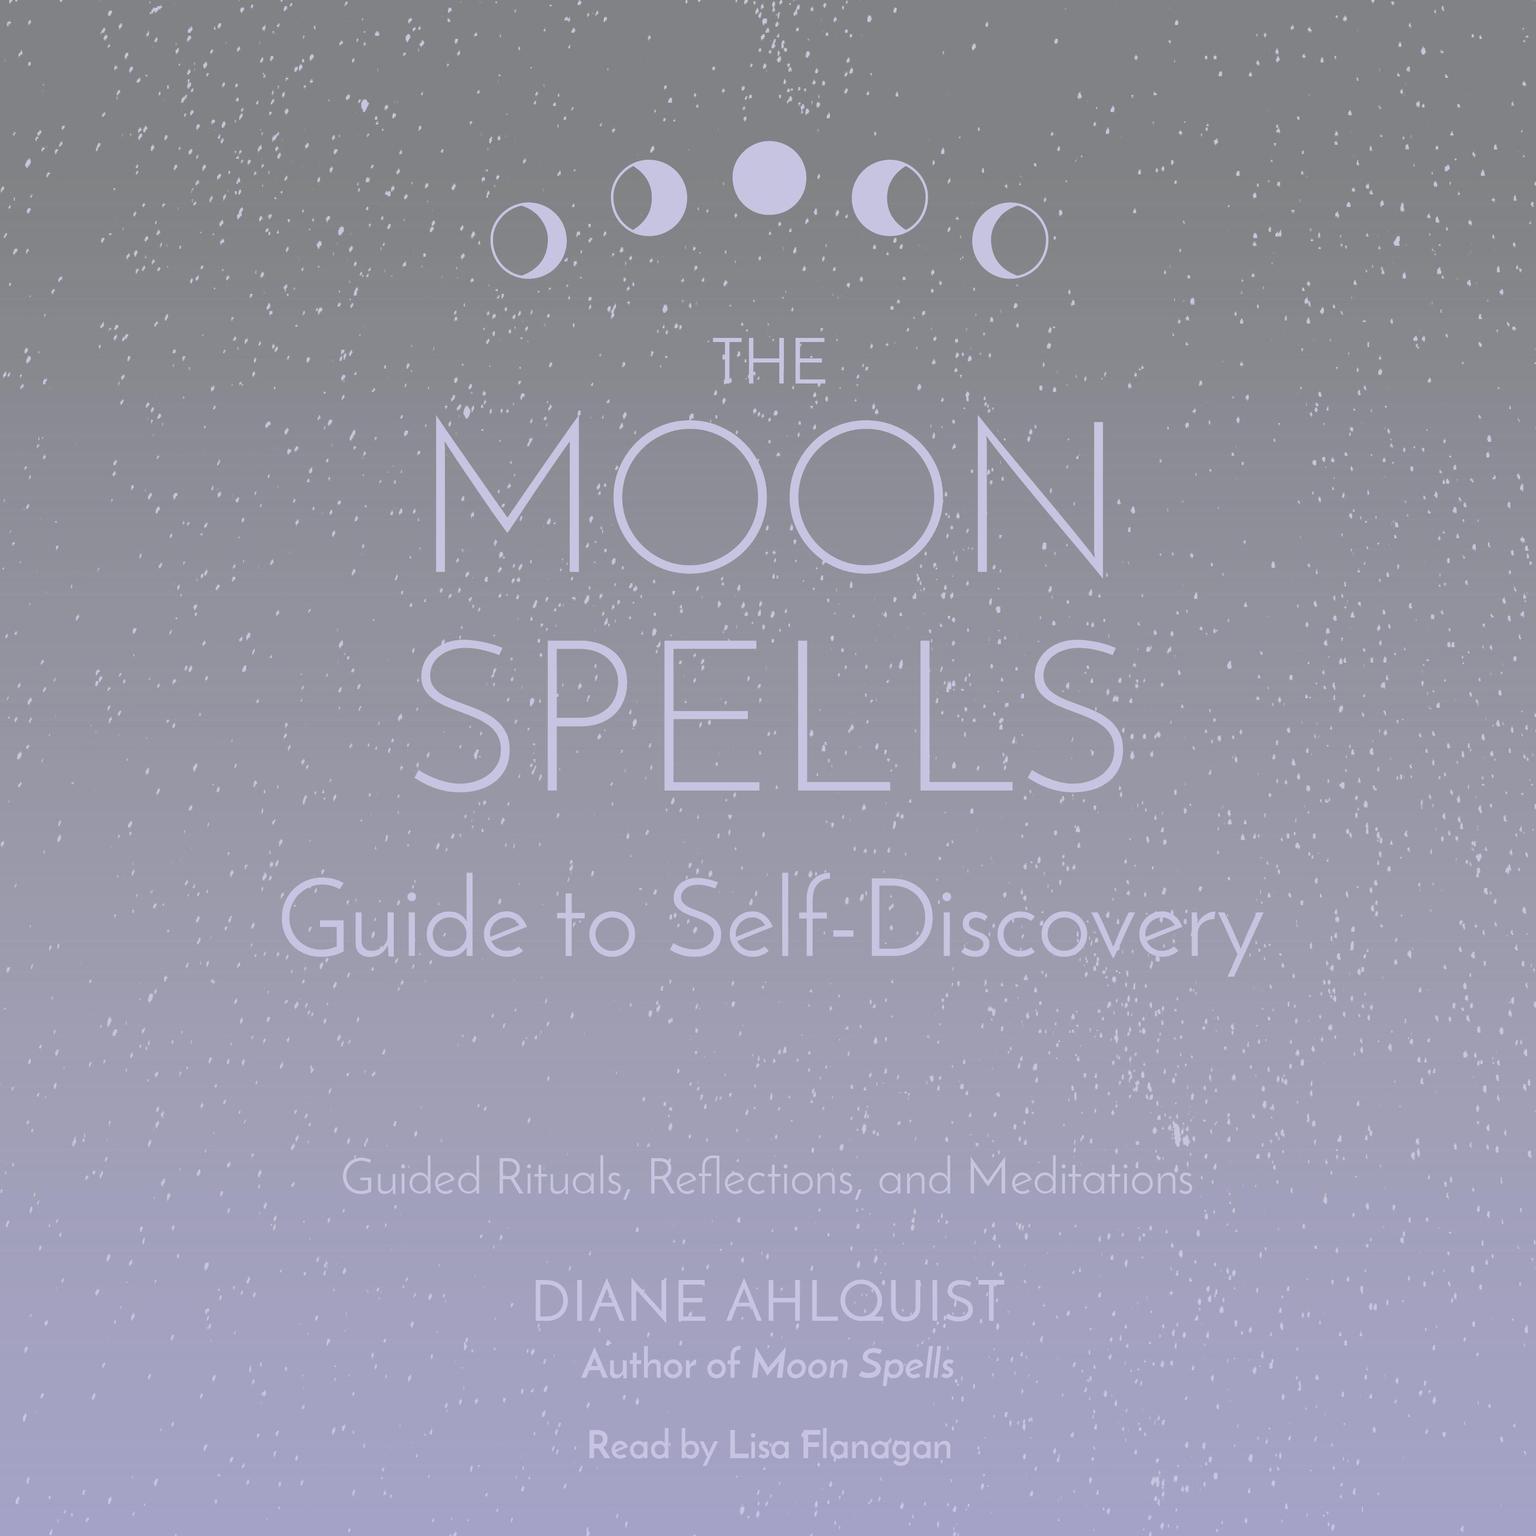 The Moon Spells Guide to Self-Discovery: Guided Rituals, Reflections, and Meditations Audiobook, by Diane Ahlquist